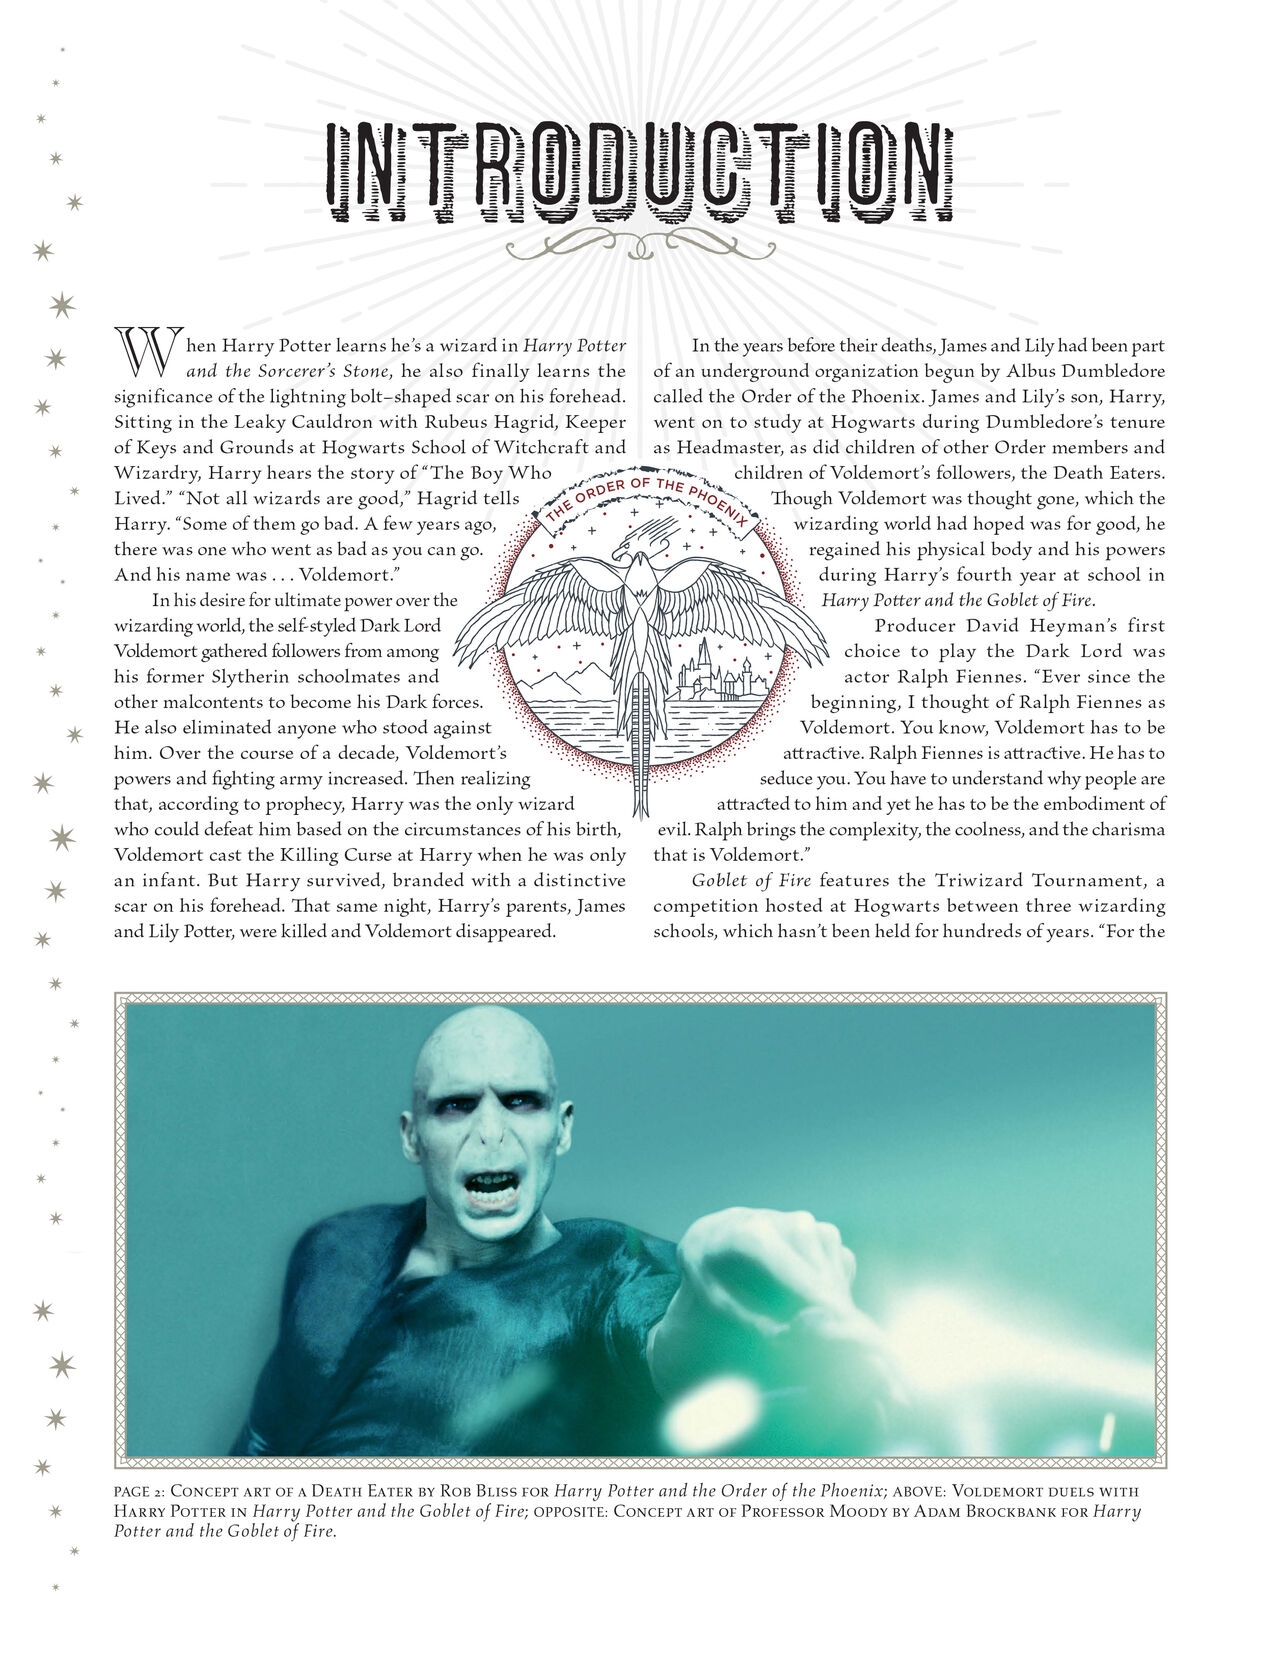 Harry Potter - Film Vault v08 - The Order of the Phoenix and Dark Forces 5